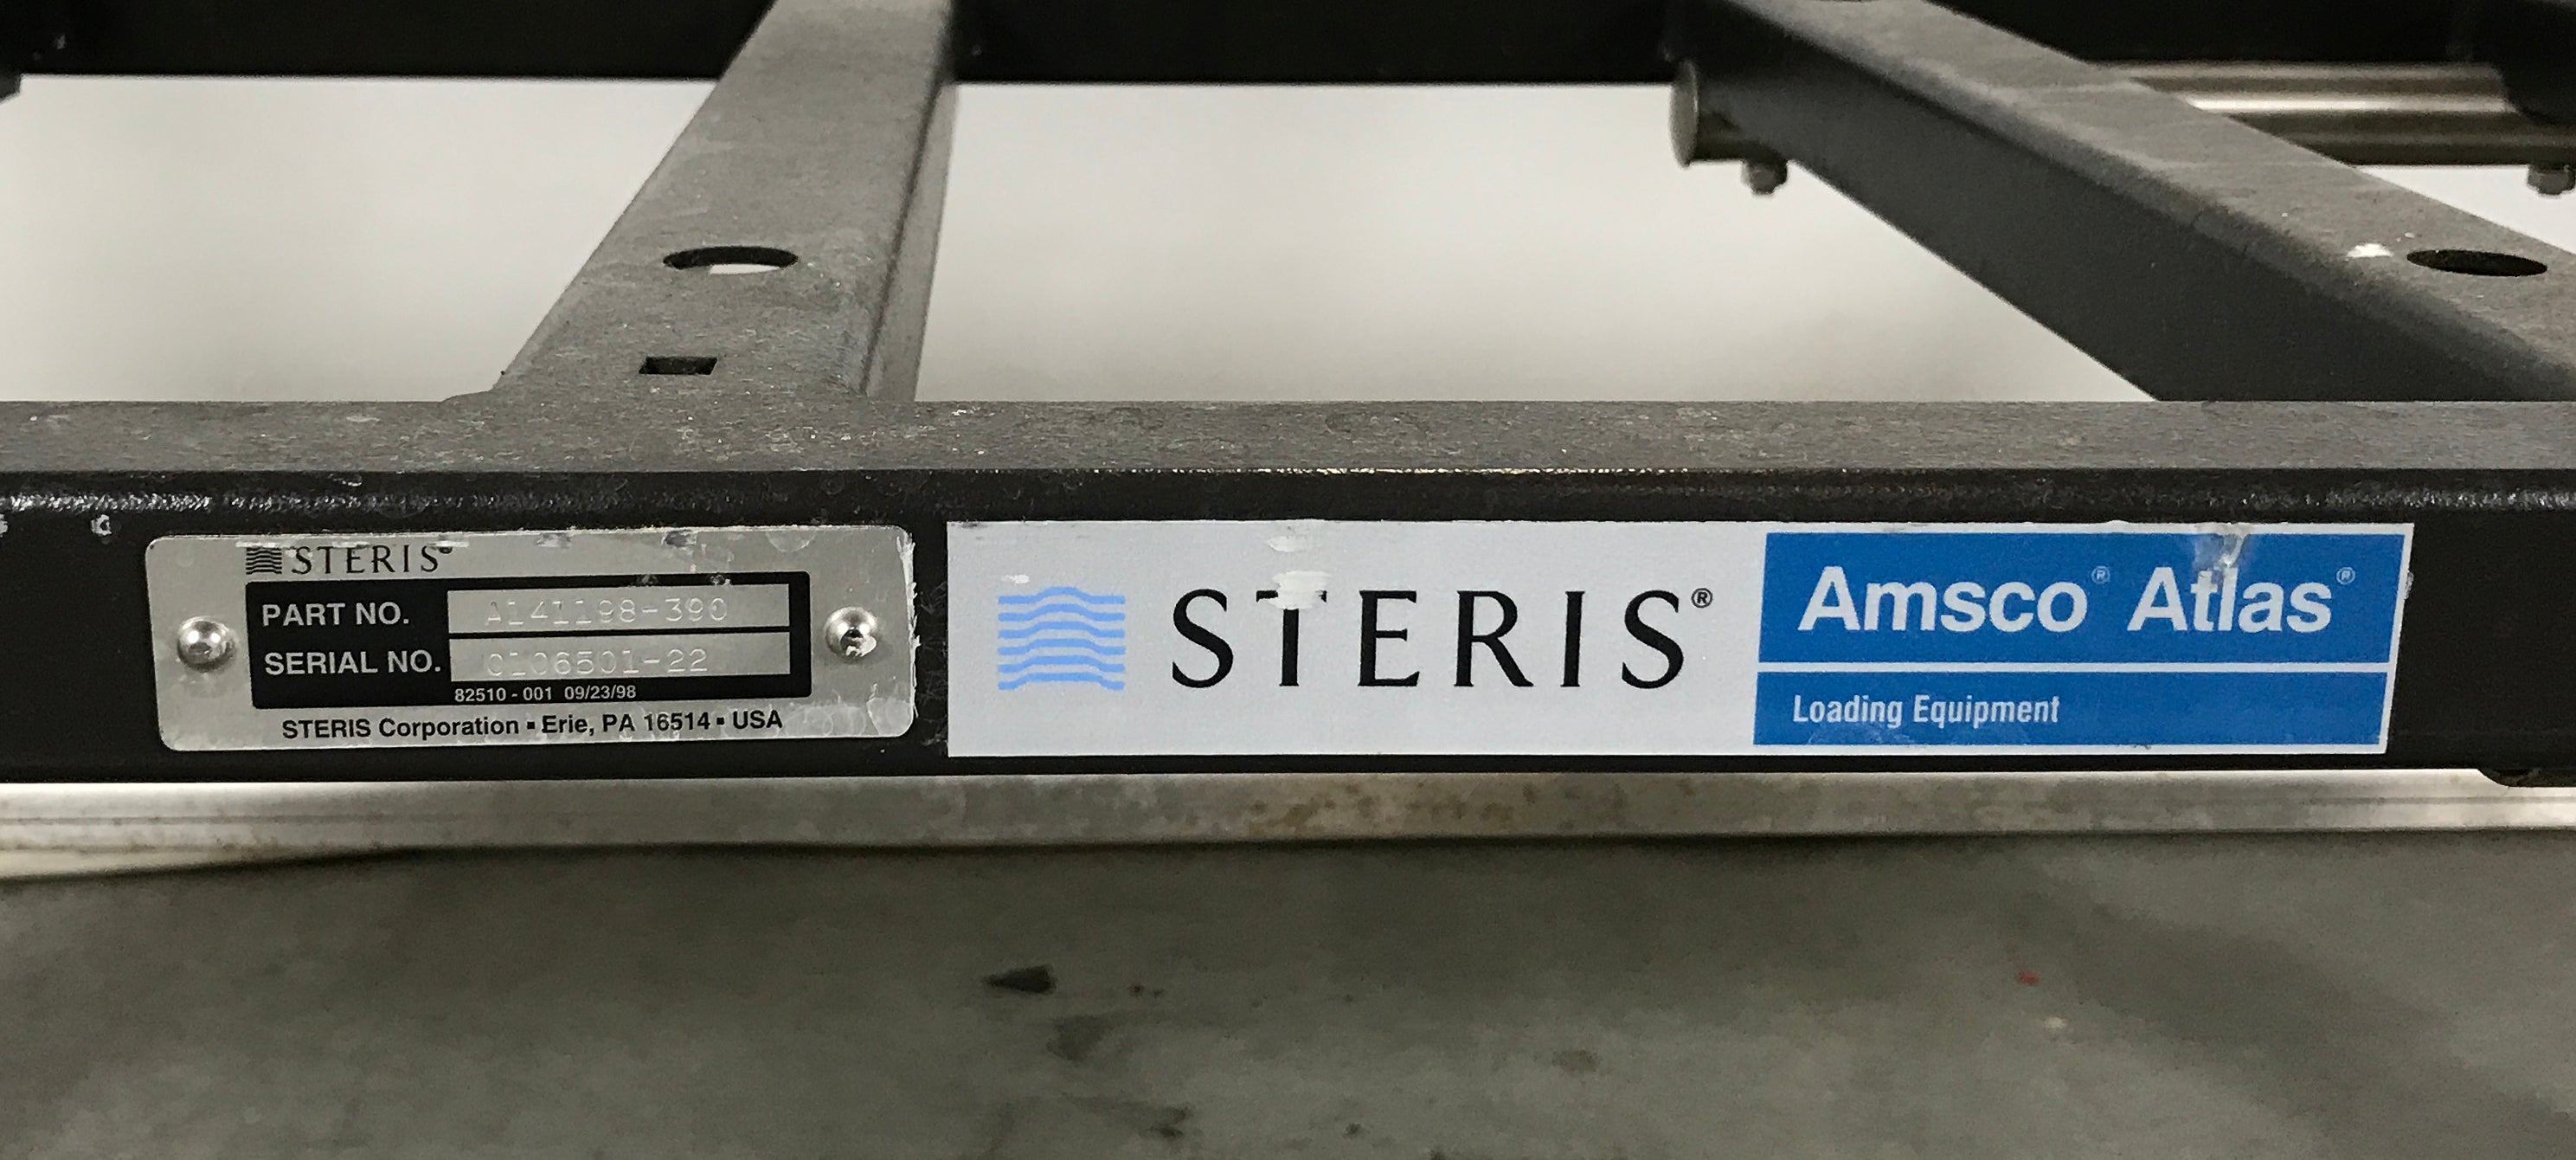 Loading/Unloading Cart for Steris Autoclaves